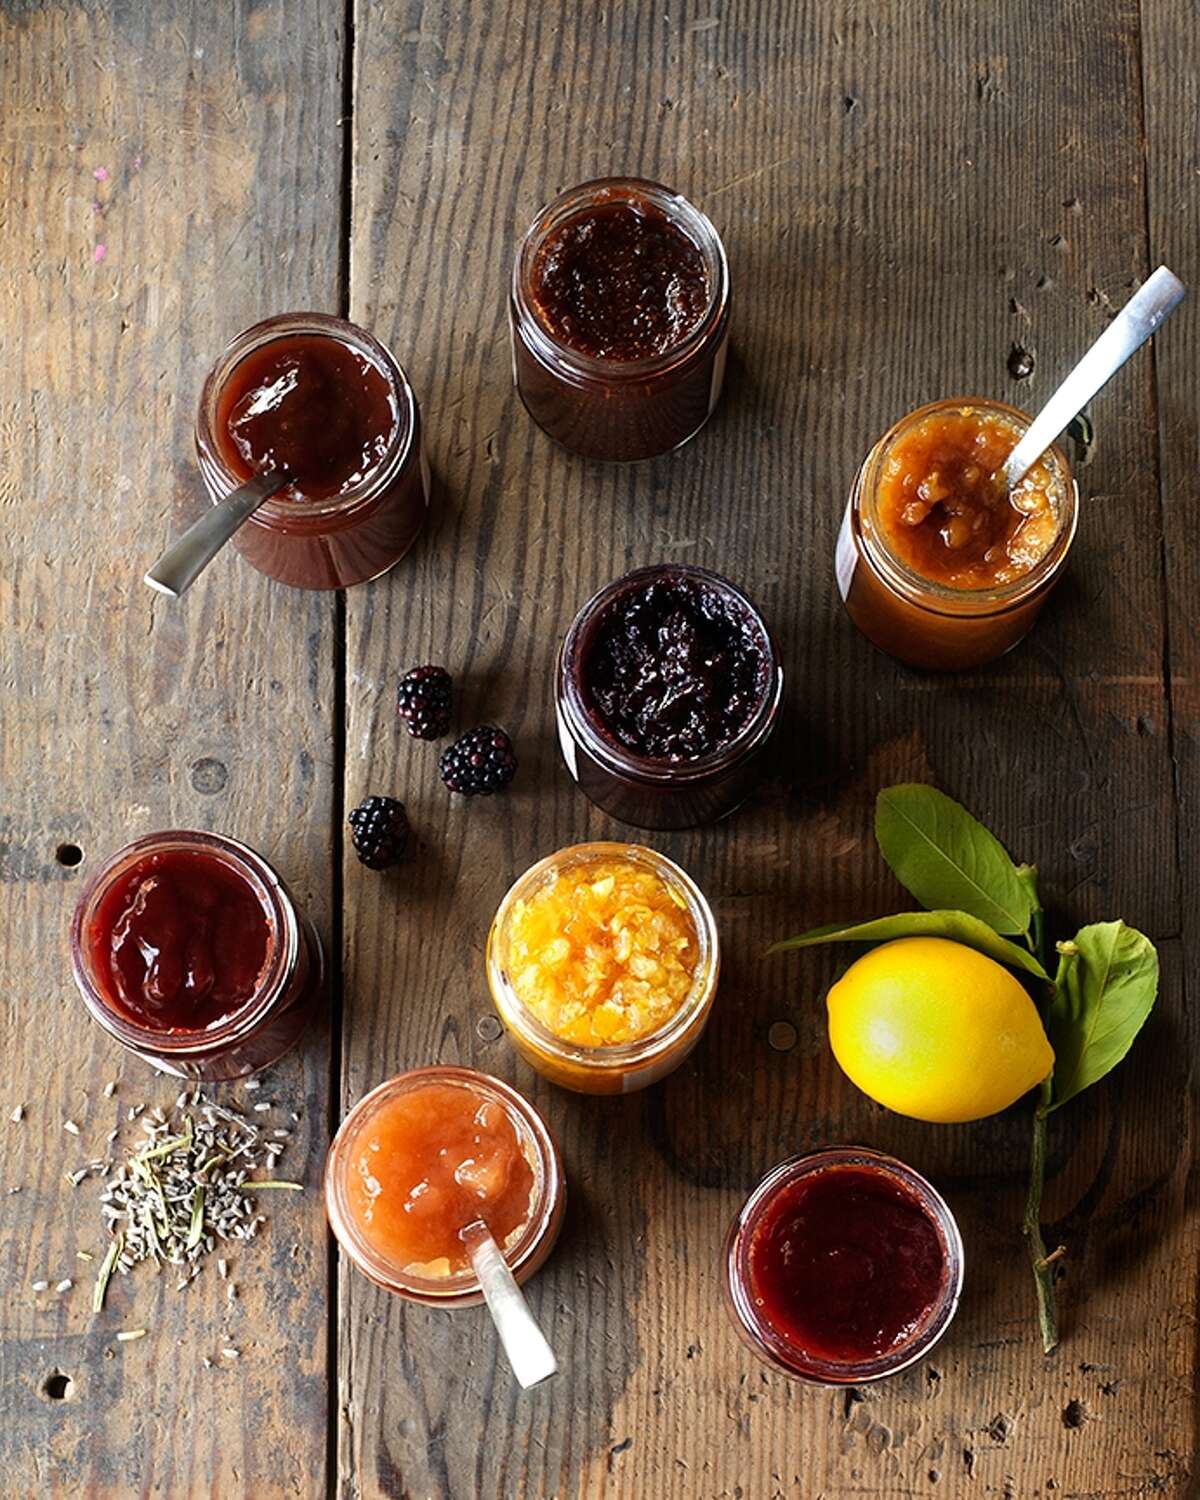 Clif Family Kitchen’s preserves line includes Meyer lemon marmalade with a fine mix of bitter and sweet.